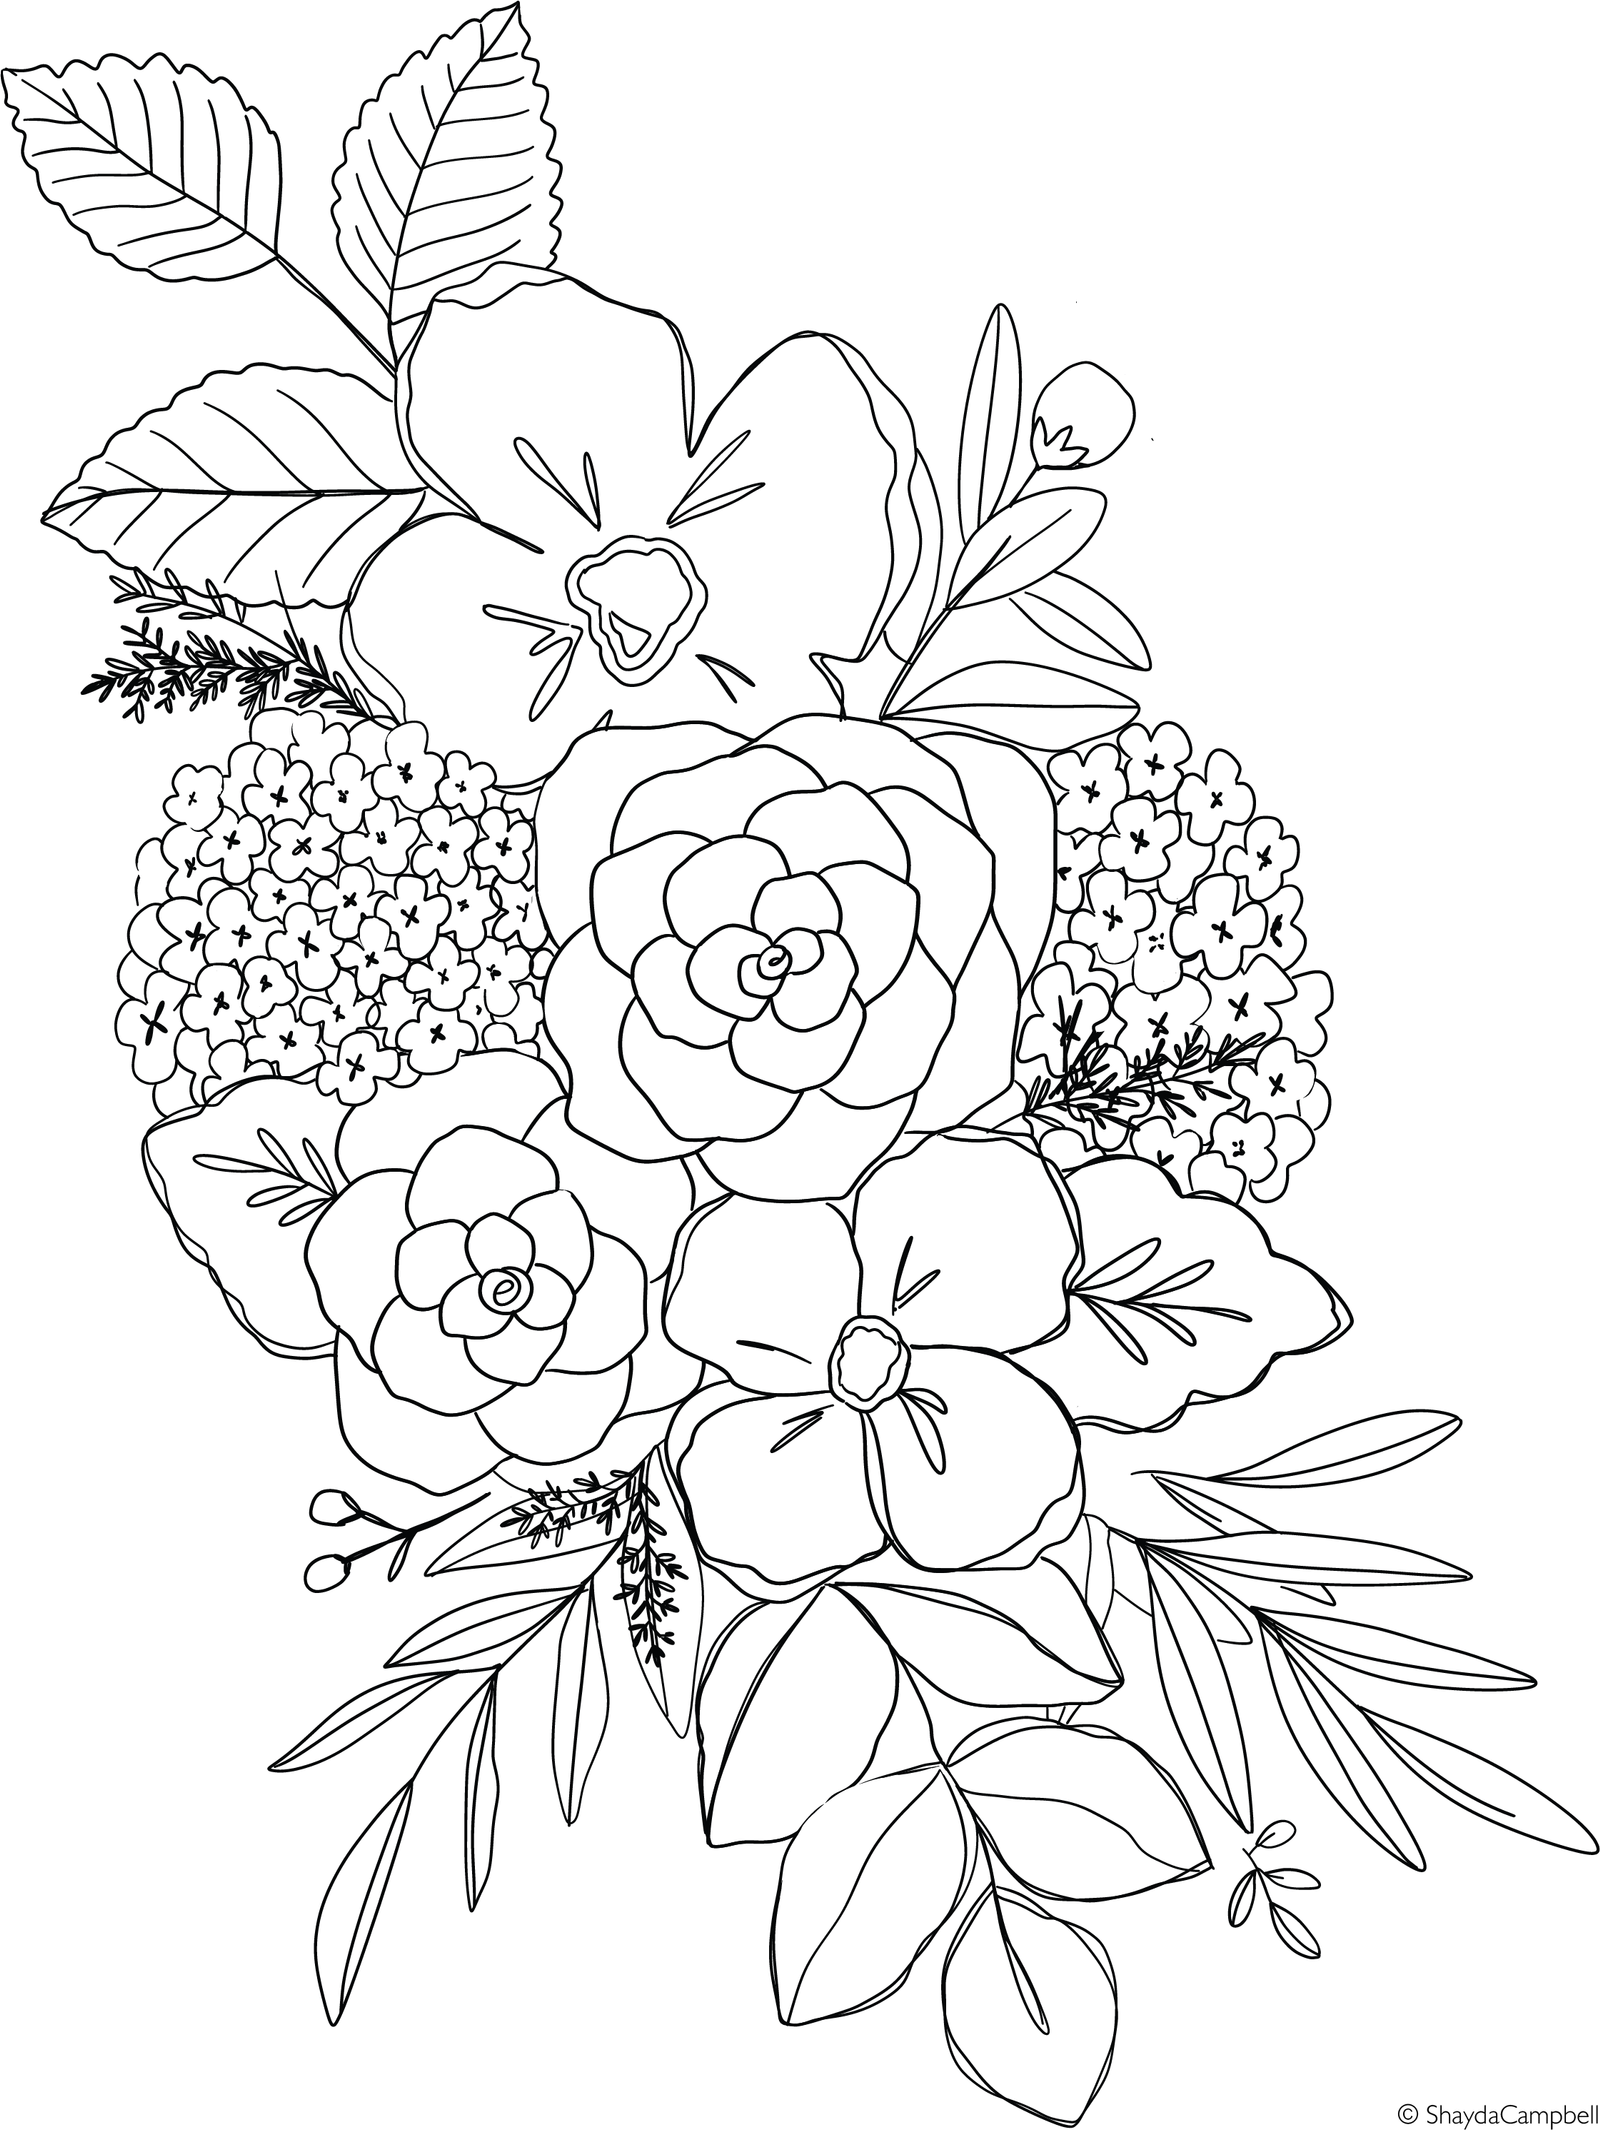 Spring Hydrangea Coloring Page | Shayda Campbell on Patreon | Floral  drawing, Flower coloring pages, Flower drawing